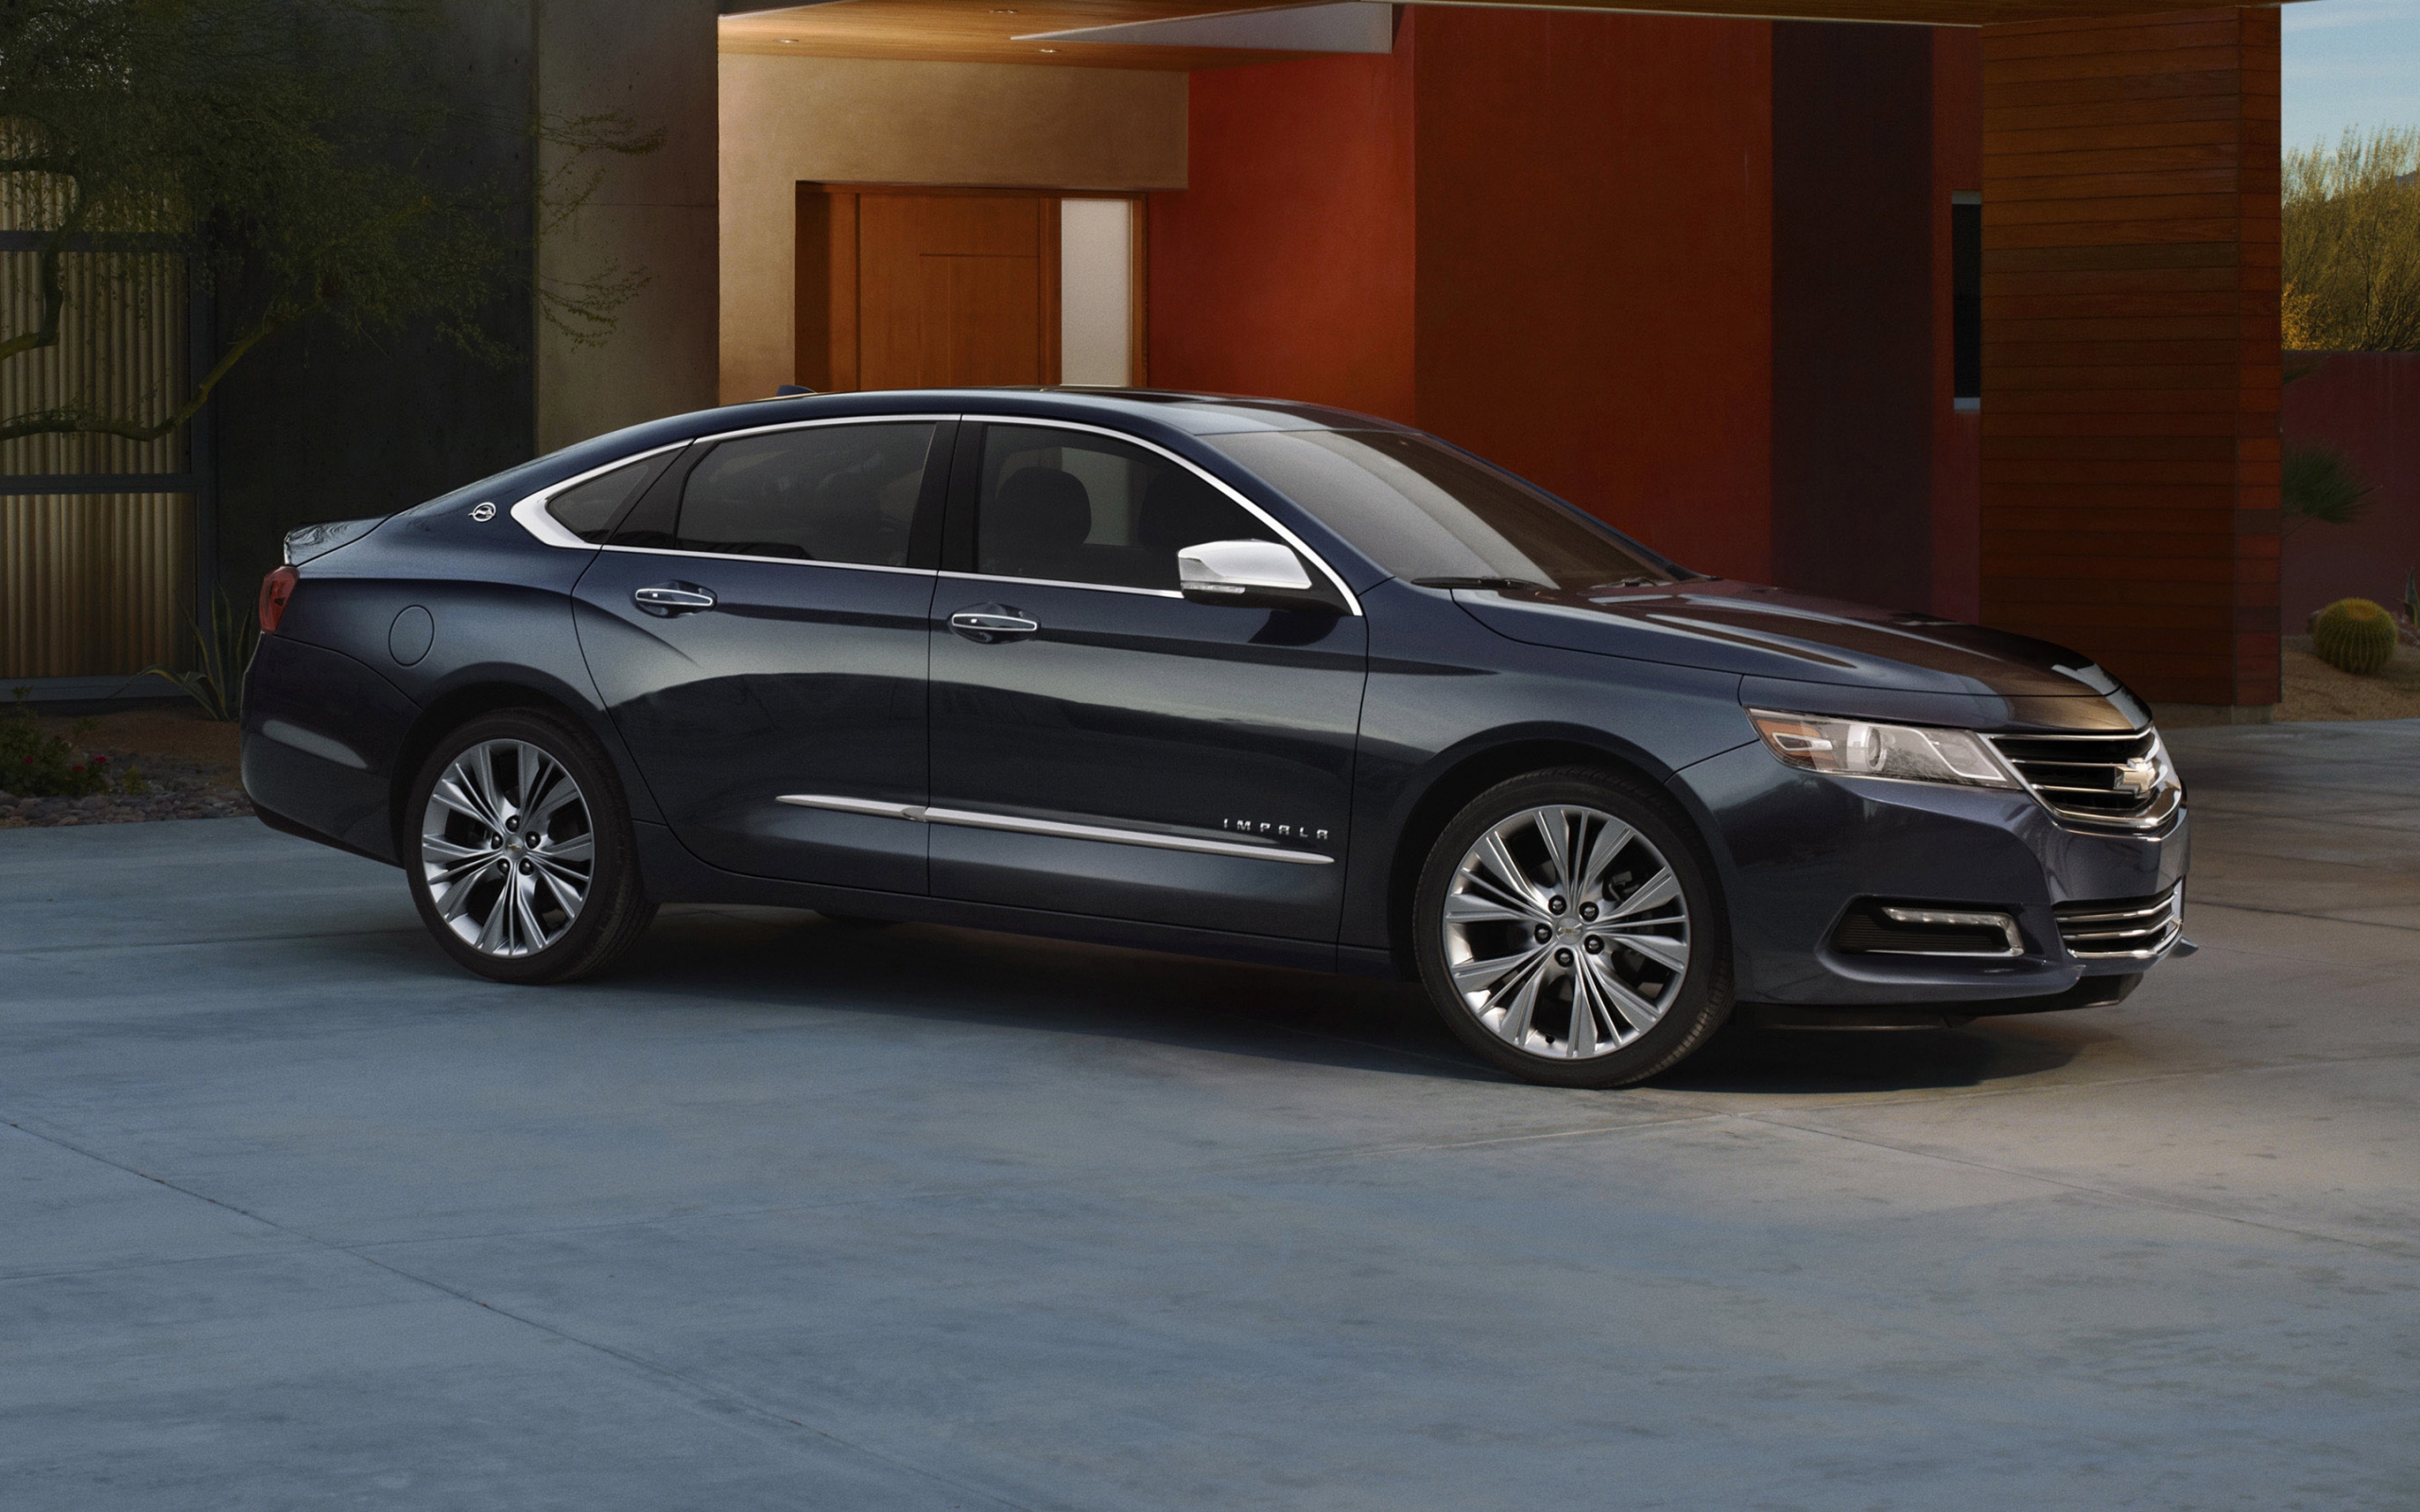 2014 Chevrolet Impala for 2560 x 1600 widescreen resolution